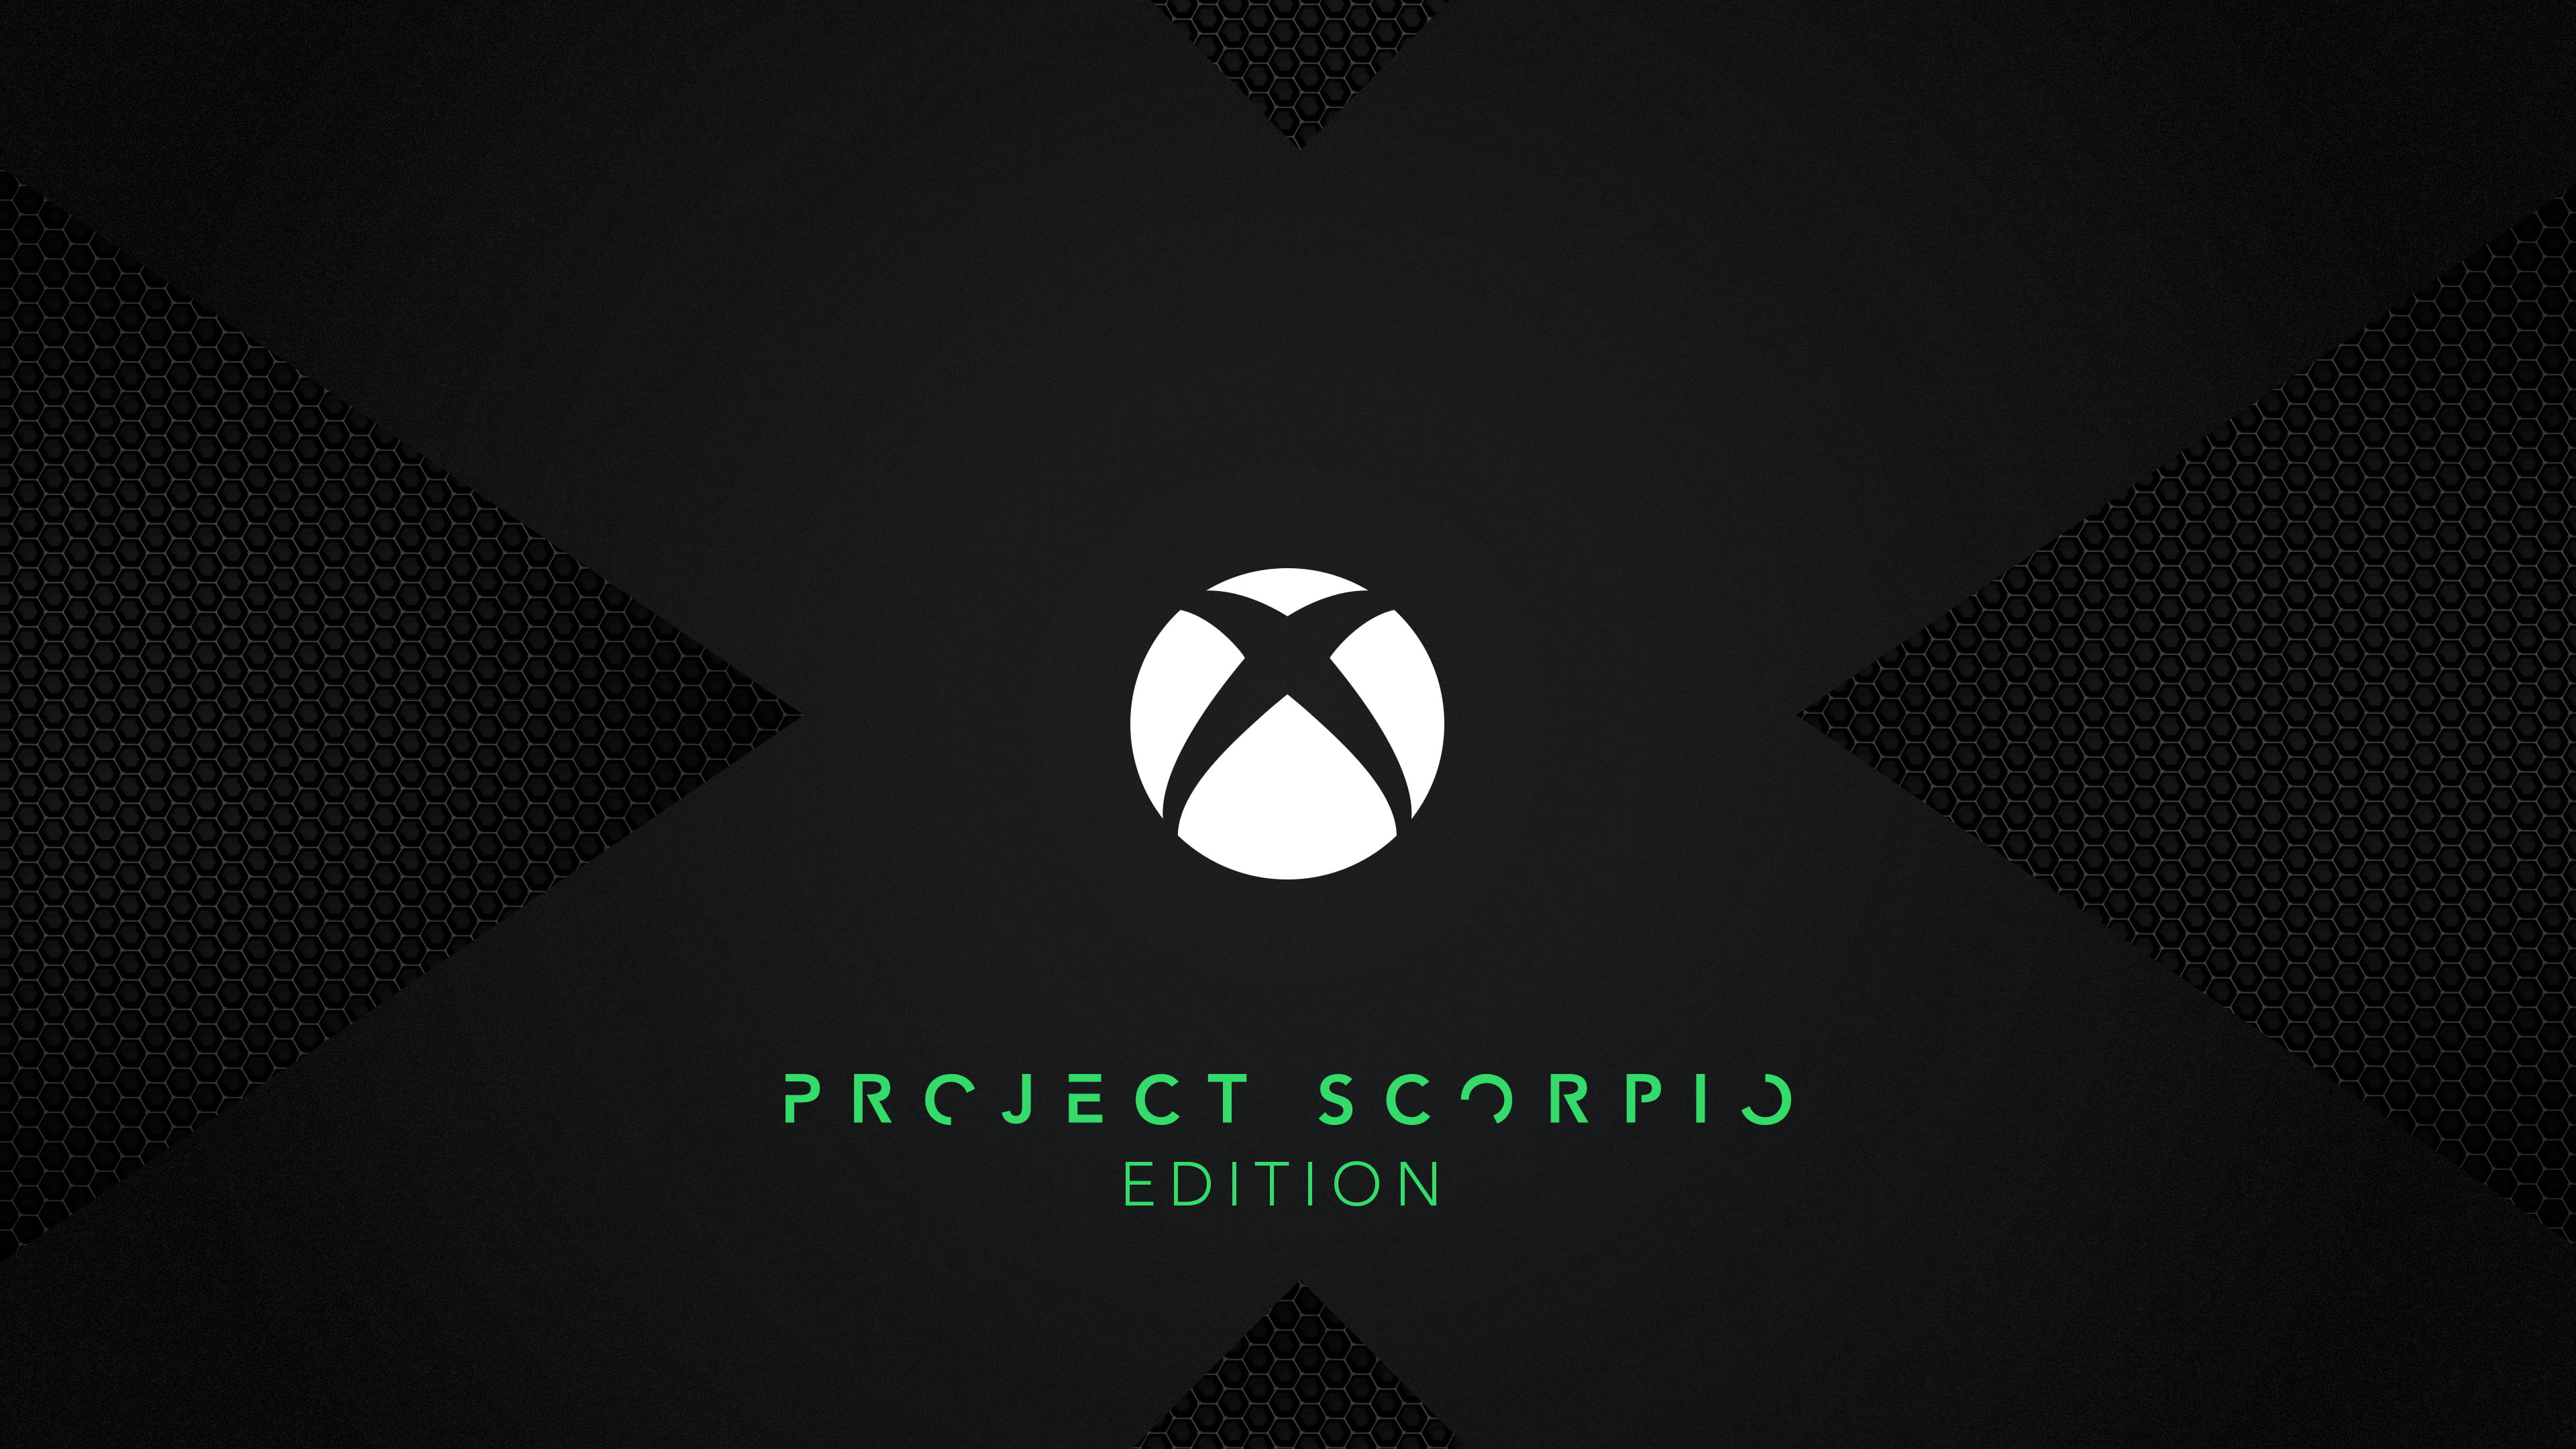 Project Scorpio poster, Xbox One, video games